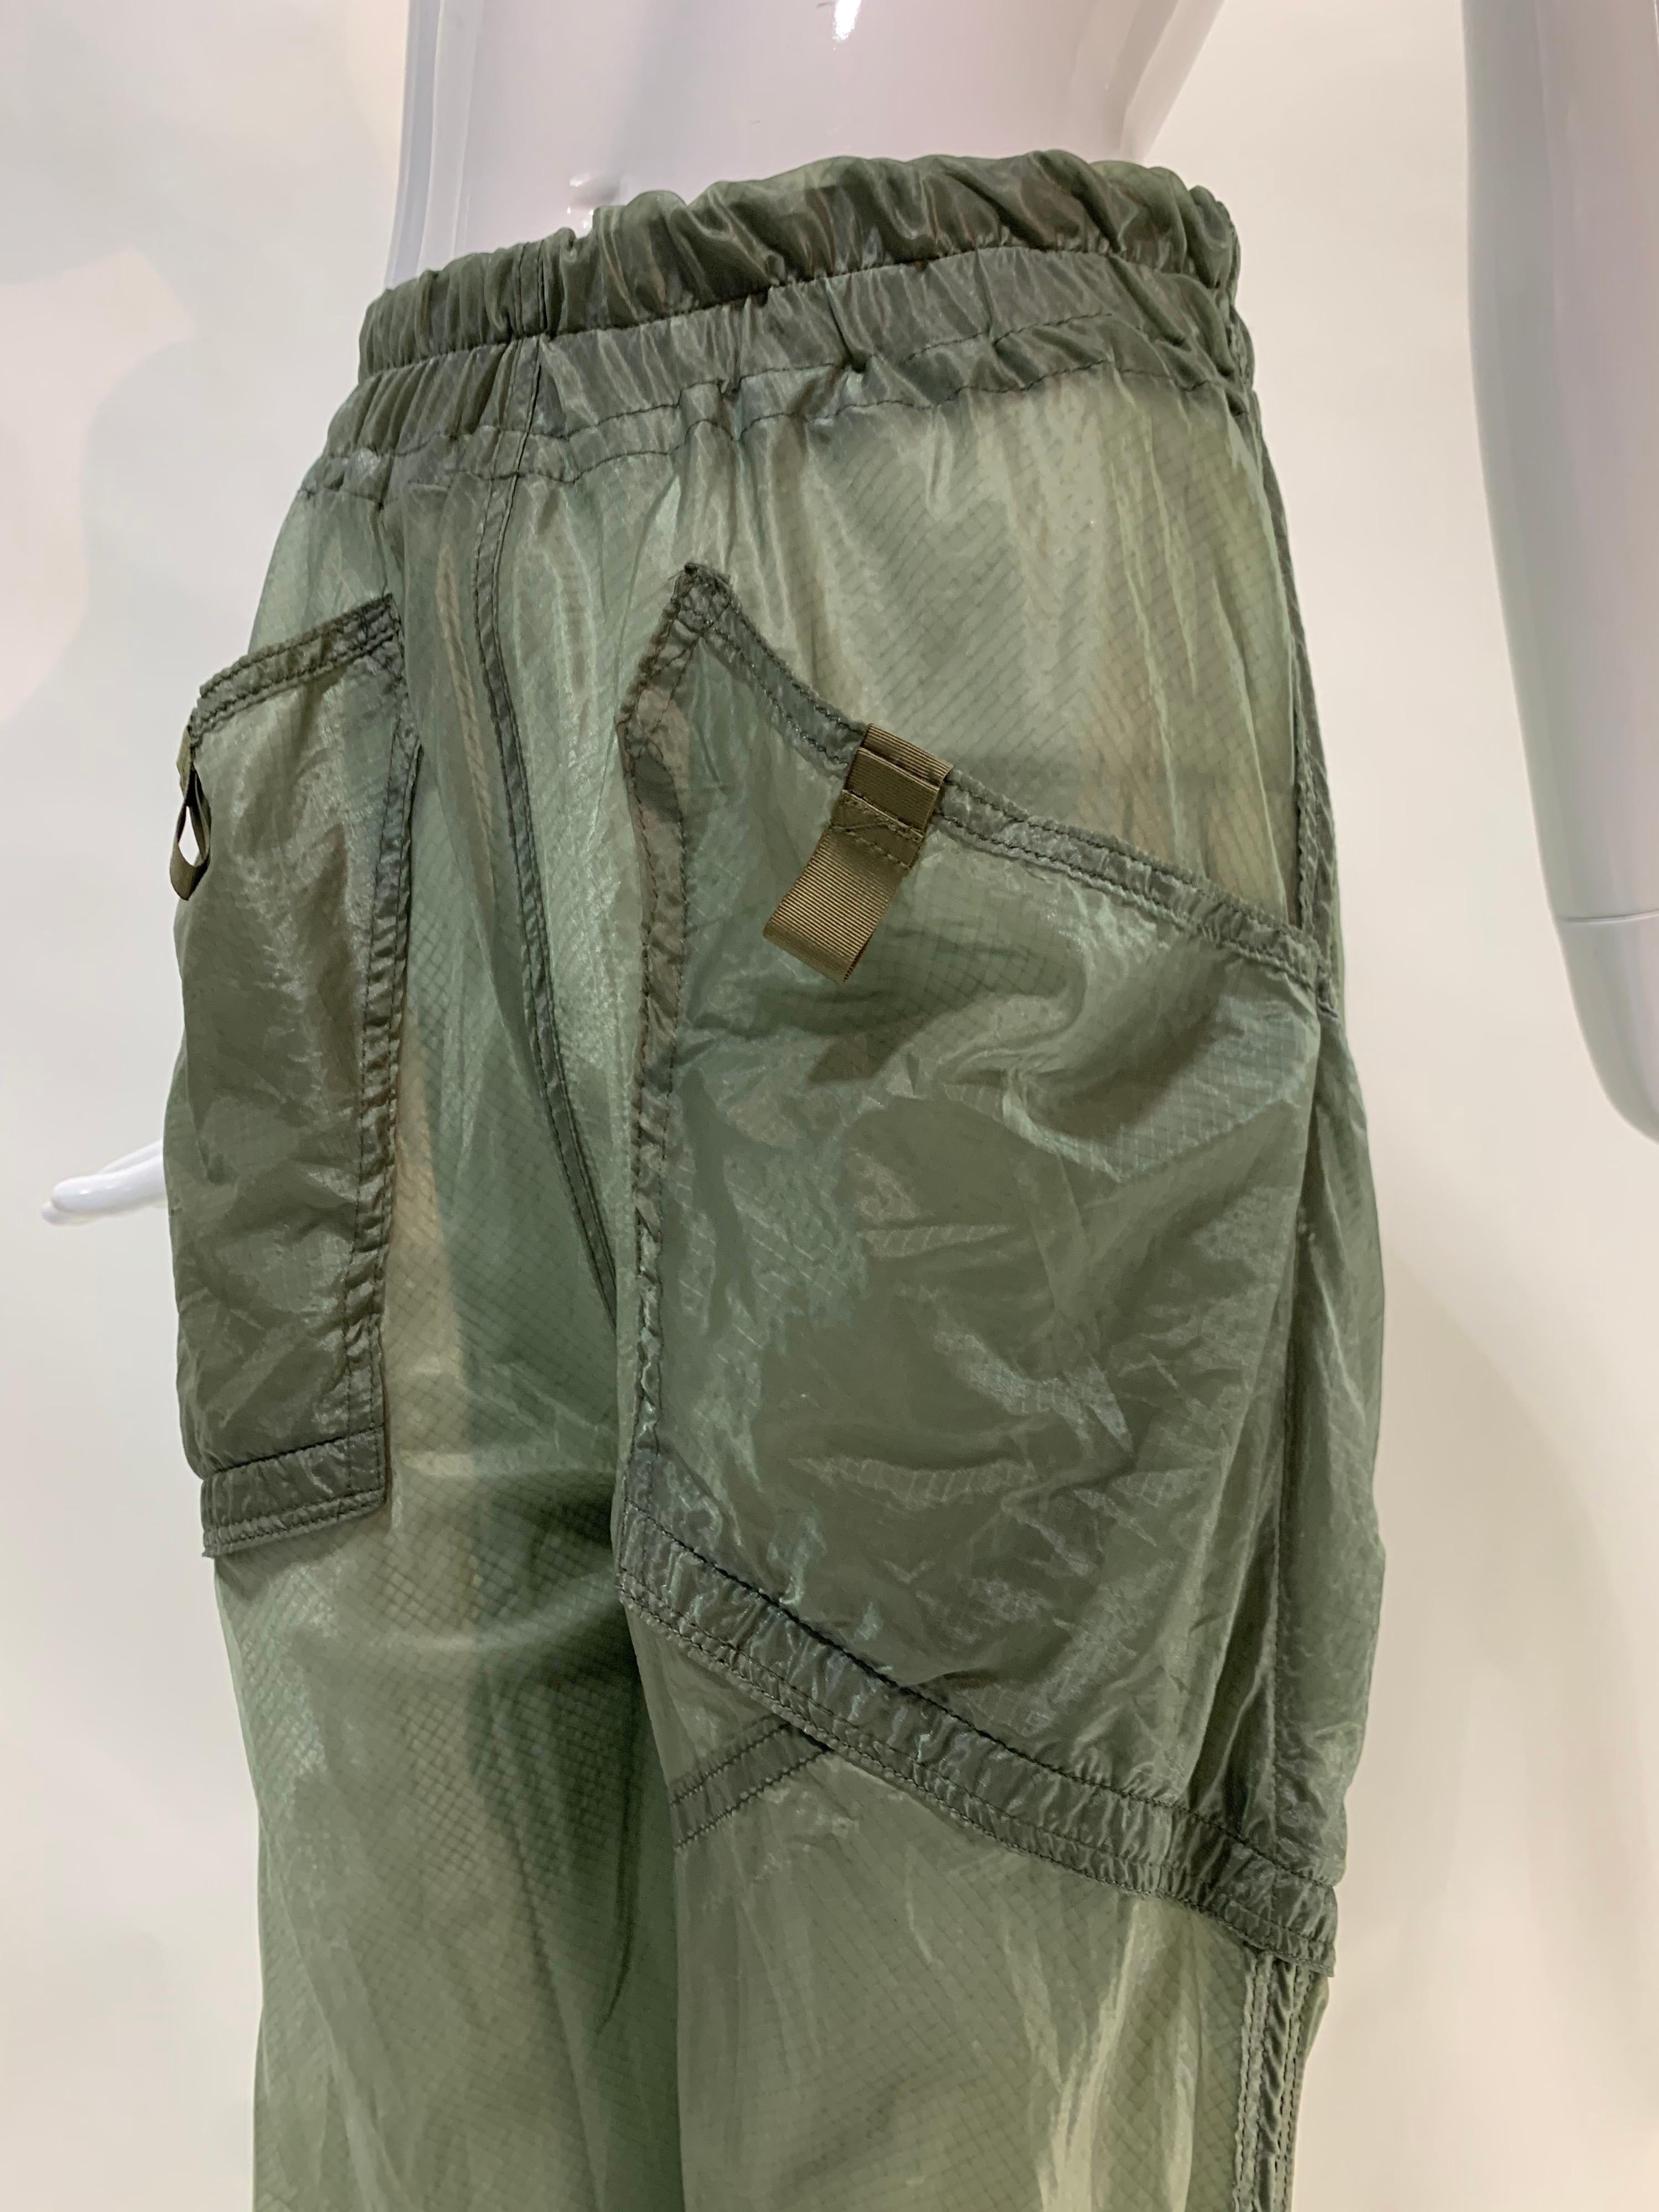 Torso Creations vintage silk parachute fabric is upcycled to fashion sheer cargo pants with multiple pocket details at front and ankle. Elasticized waistband. Fits Small-Medium. A great bikini coverup for resort from our Spring/Summer 2022